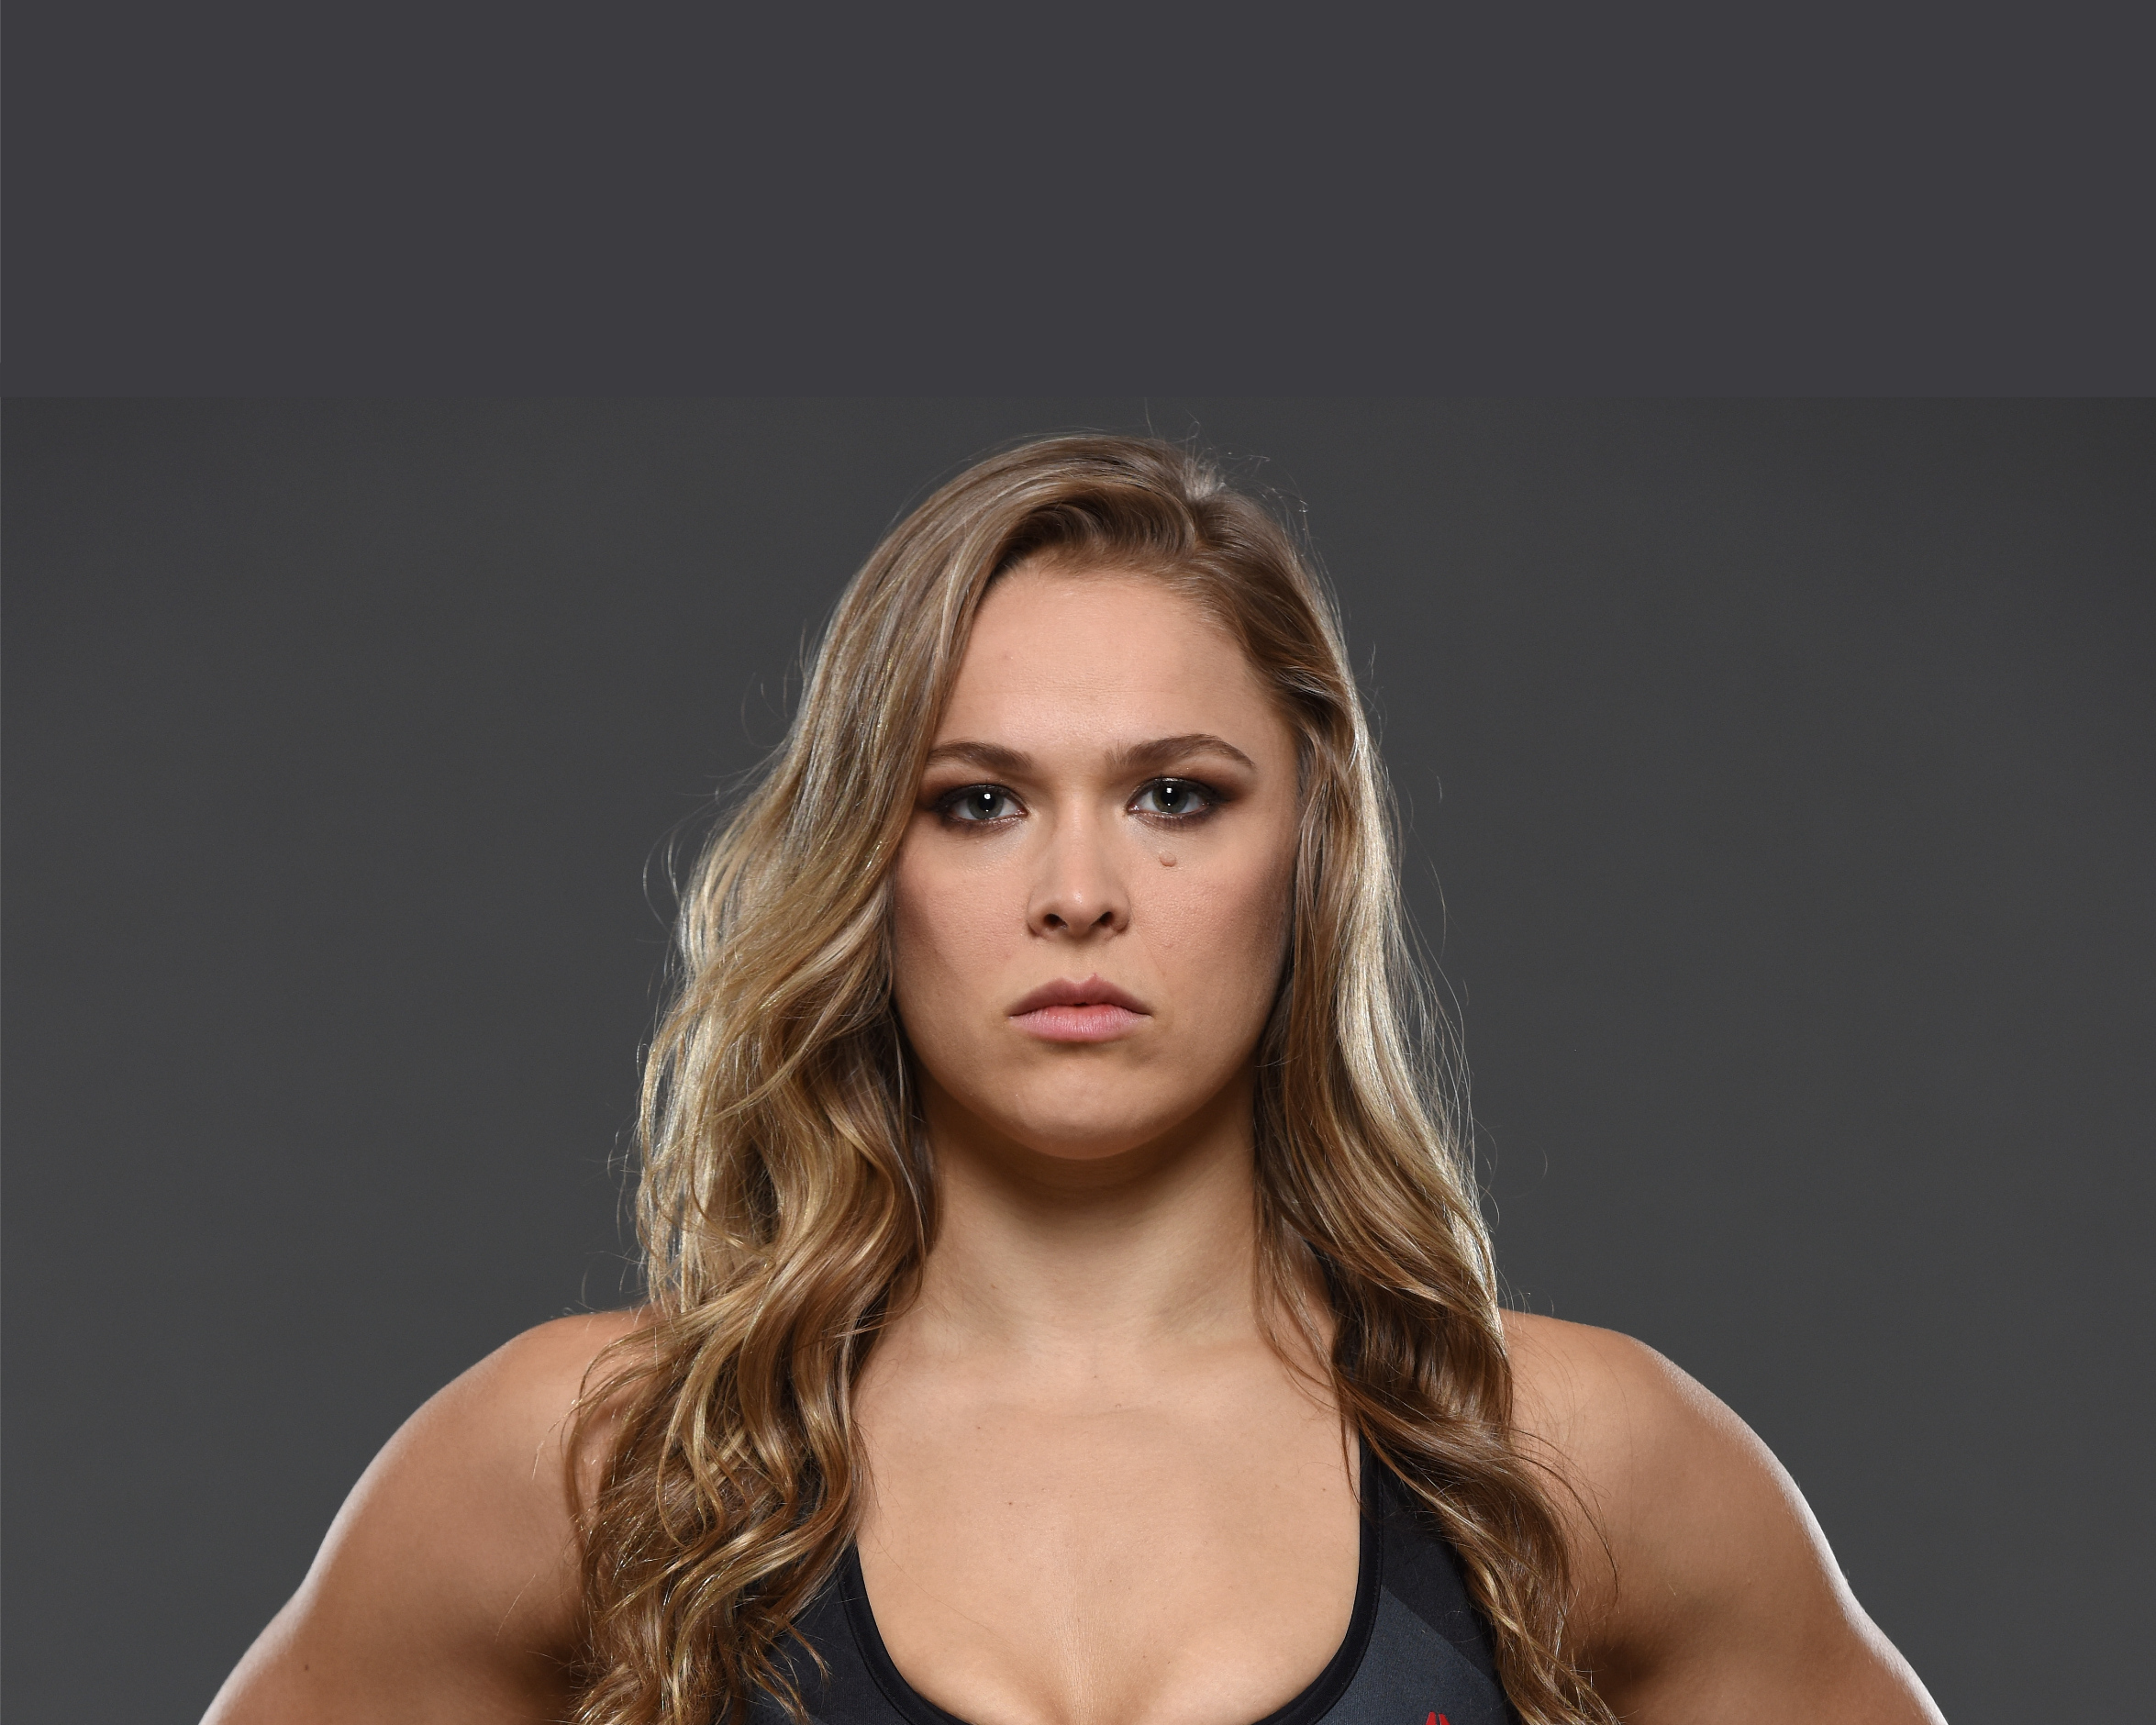 'Fighting Like A Girl' With Ronda Rousey - TFG Media